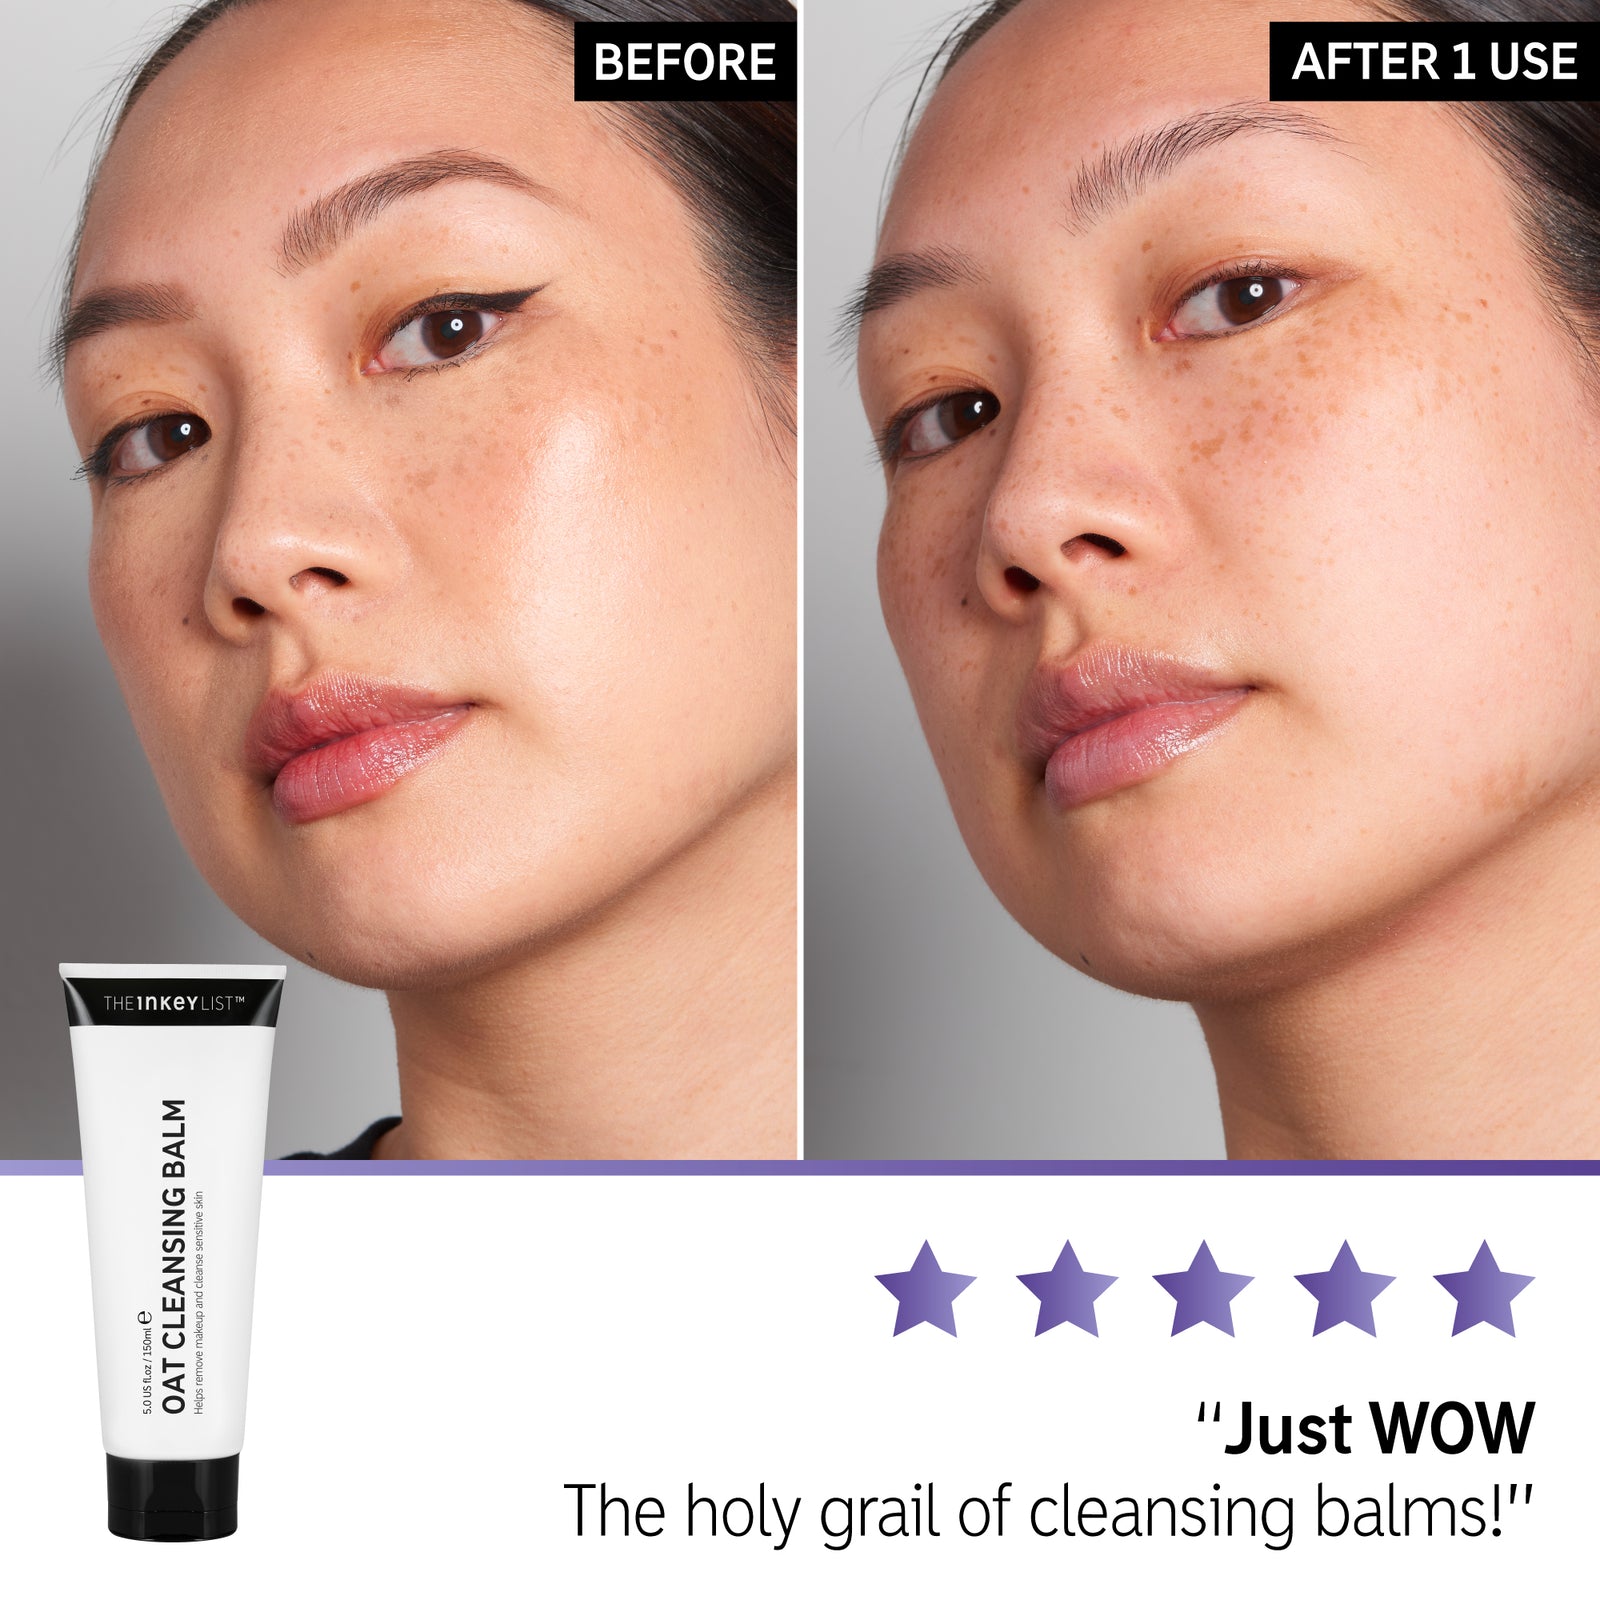 Before and After shot on a model showcasing the benefits after 1 use of Oat Cleansing Balm, a product within this trio. Underneath the model shots is a banner with a product shot of the Oat Cleansing Balm bottle. Next to this is a 5 star rating and a quote that states 